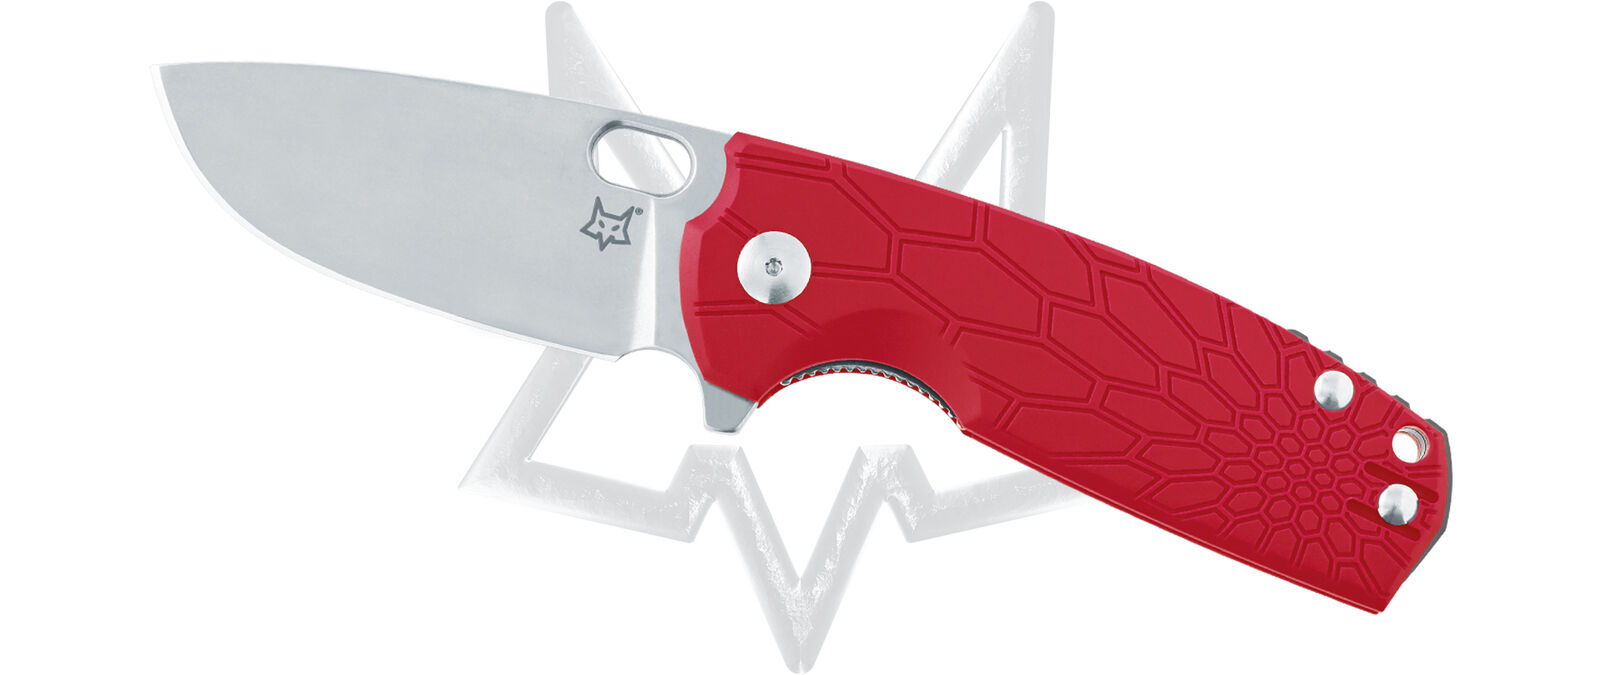 Fox Knives Core Liner Lock FX-604 R N690Co Stainless Steel Red FRN Pocket Knife